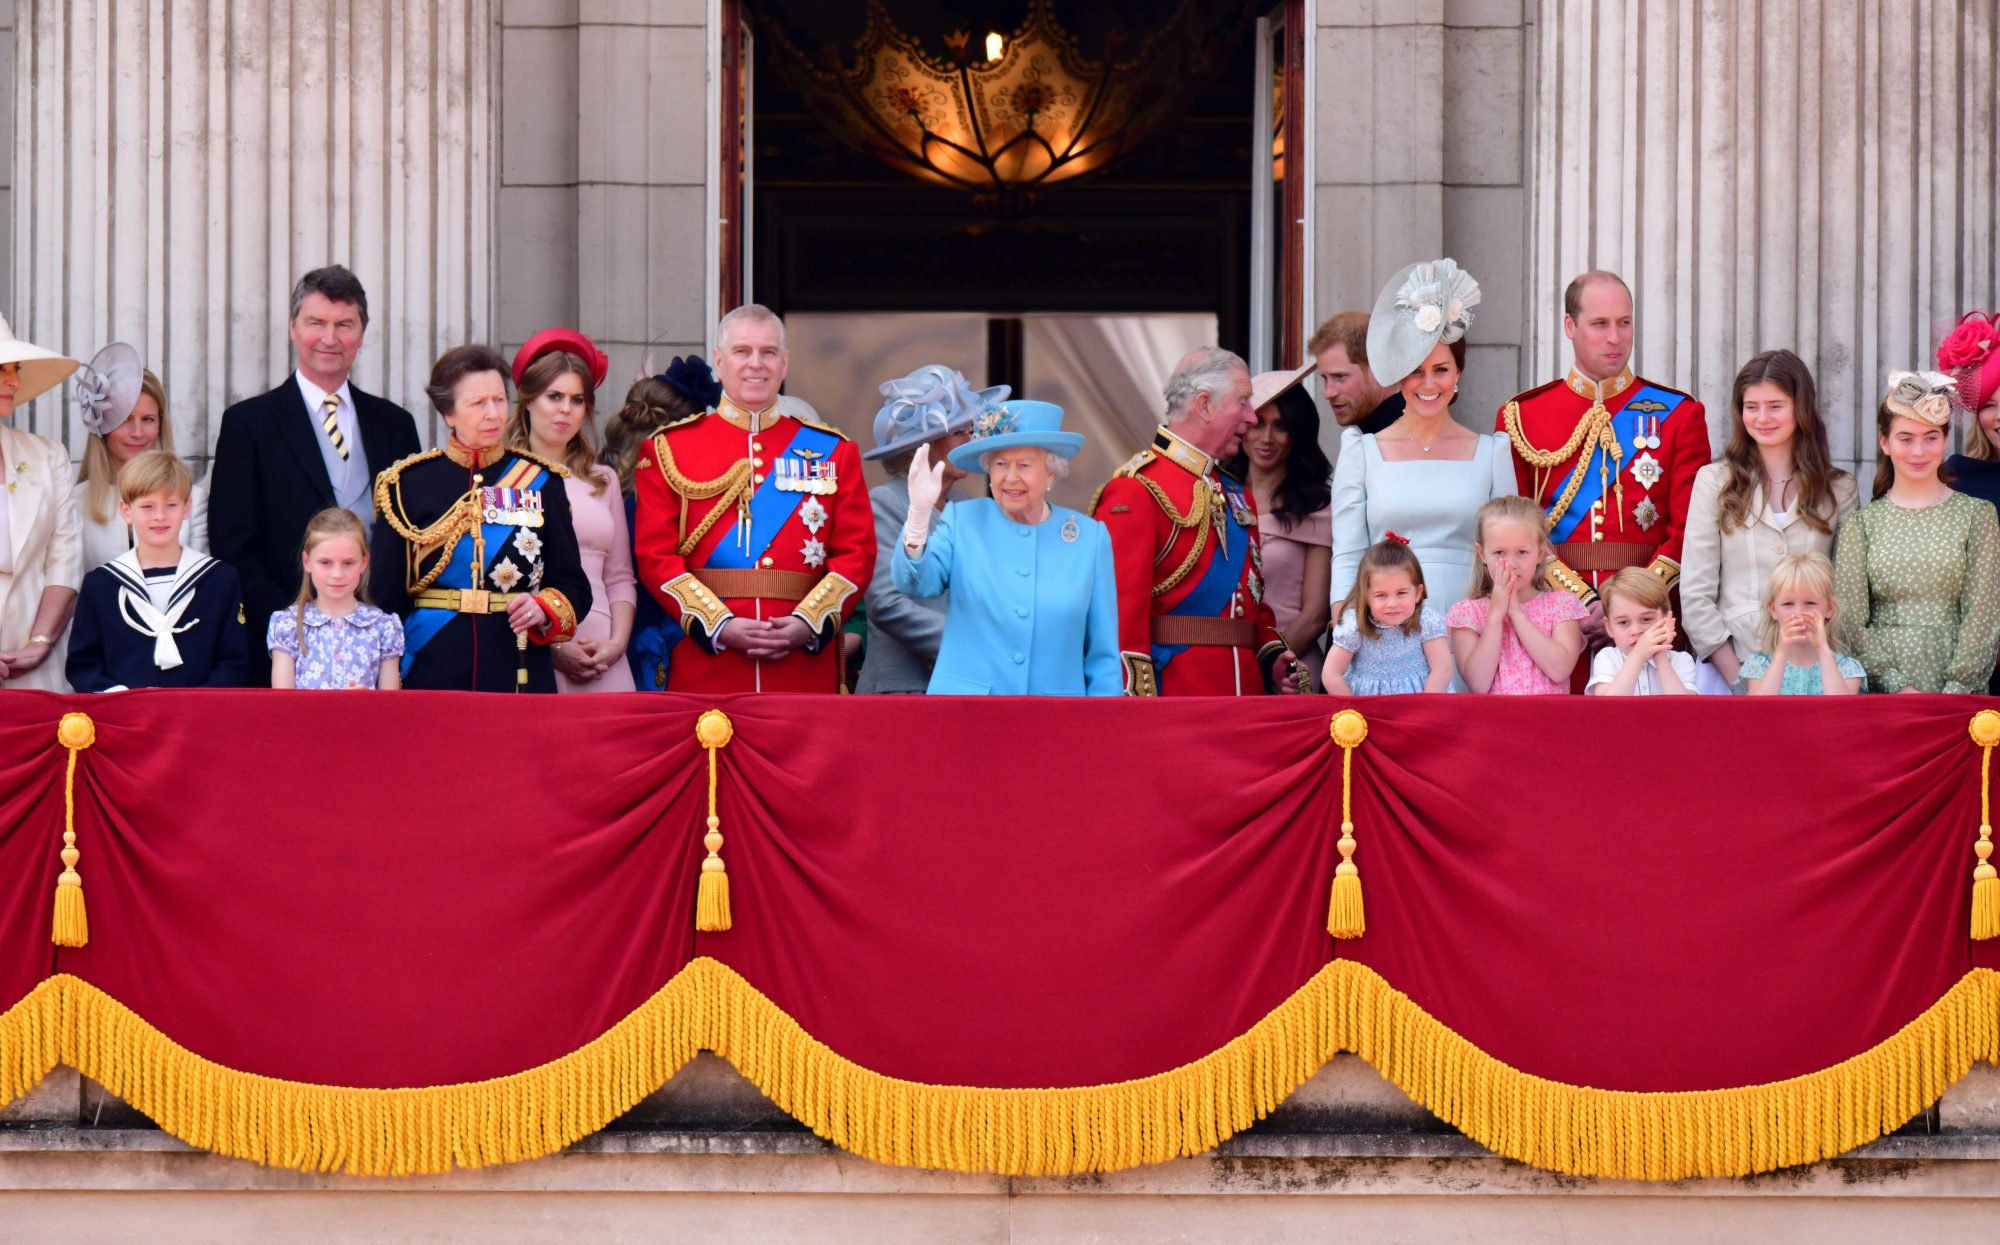 The British royal family gather on the balcony of London’s Buckingham Palace during the Trooping the Colour parade in, June 2018. Photo: FilmMagic